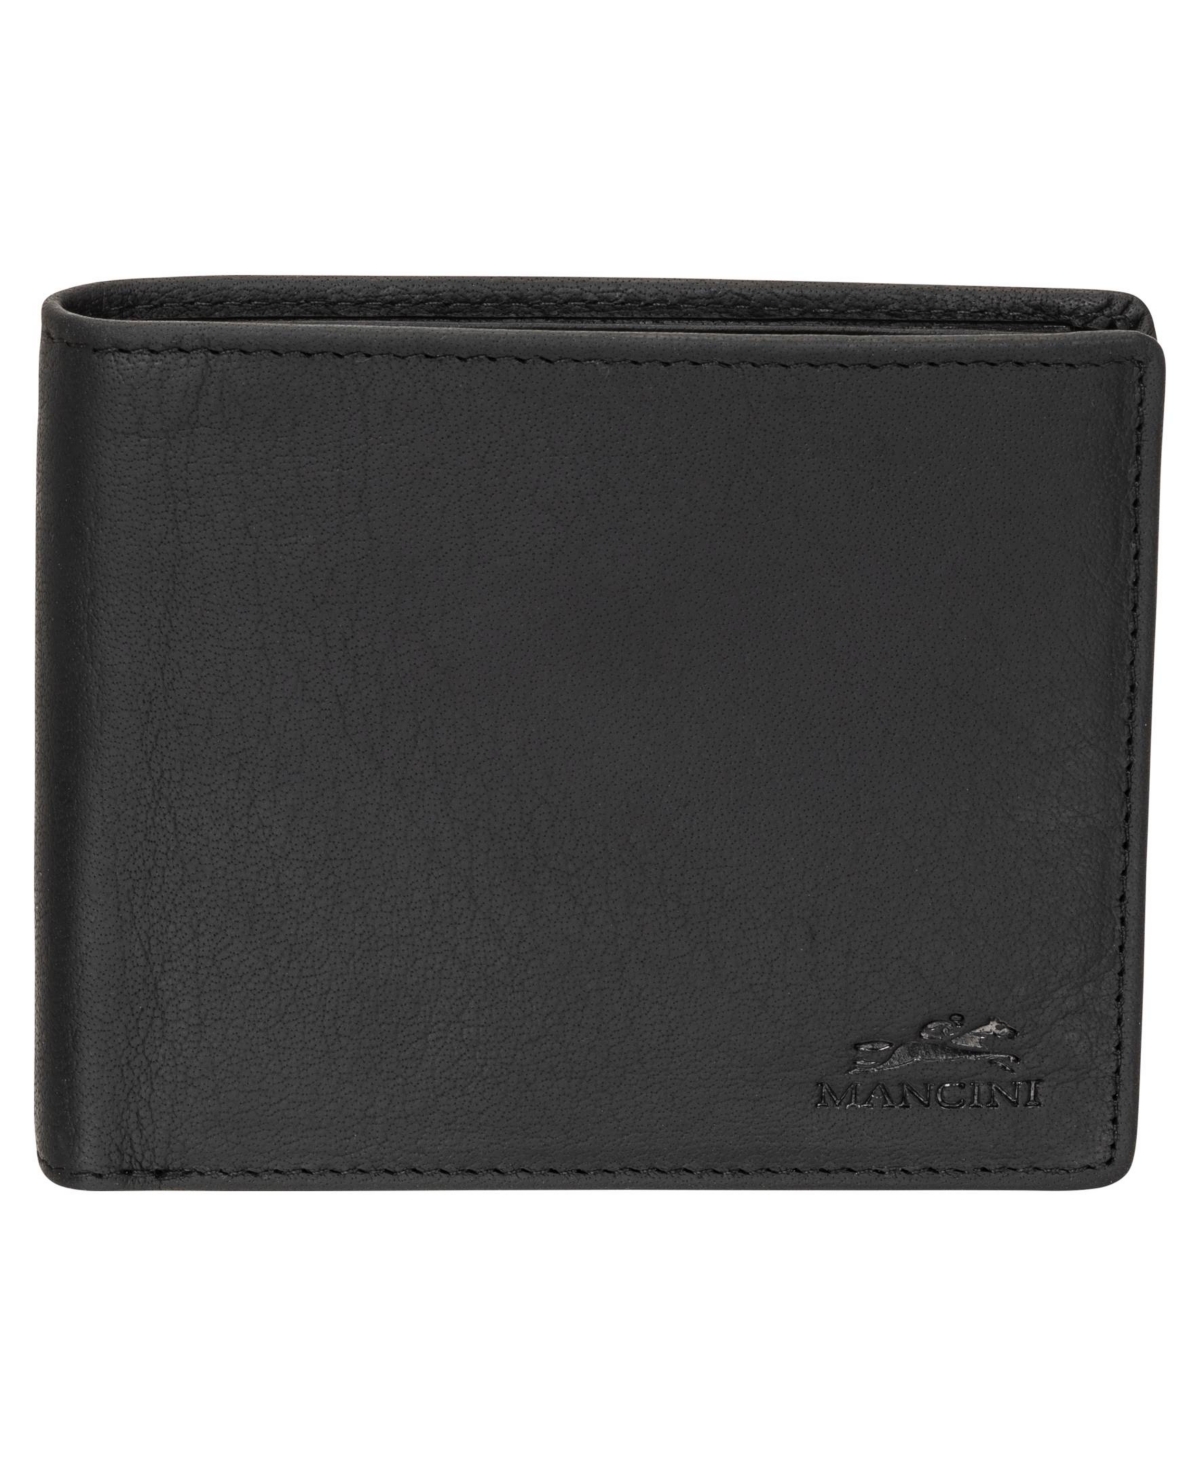 Mancini Men's Buffalo Rfid Secure Wallet With Coin Pocket In Black